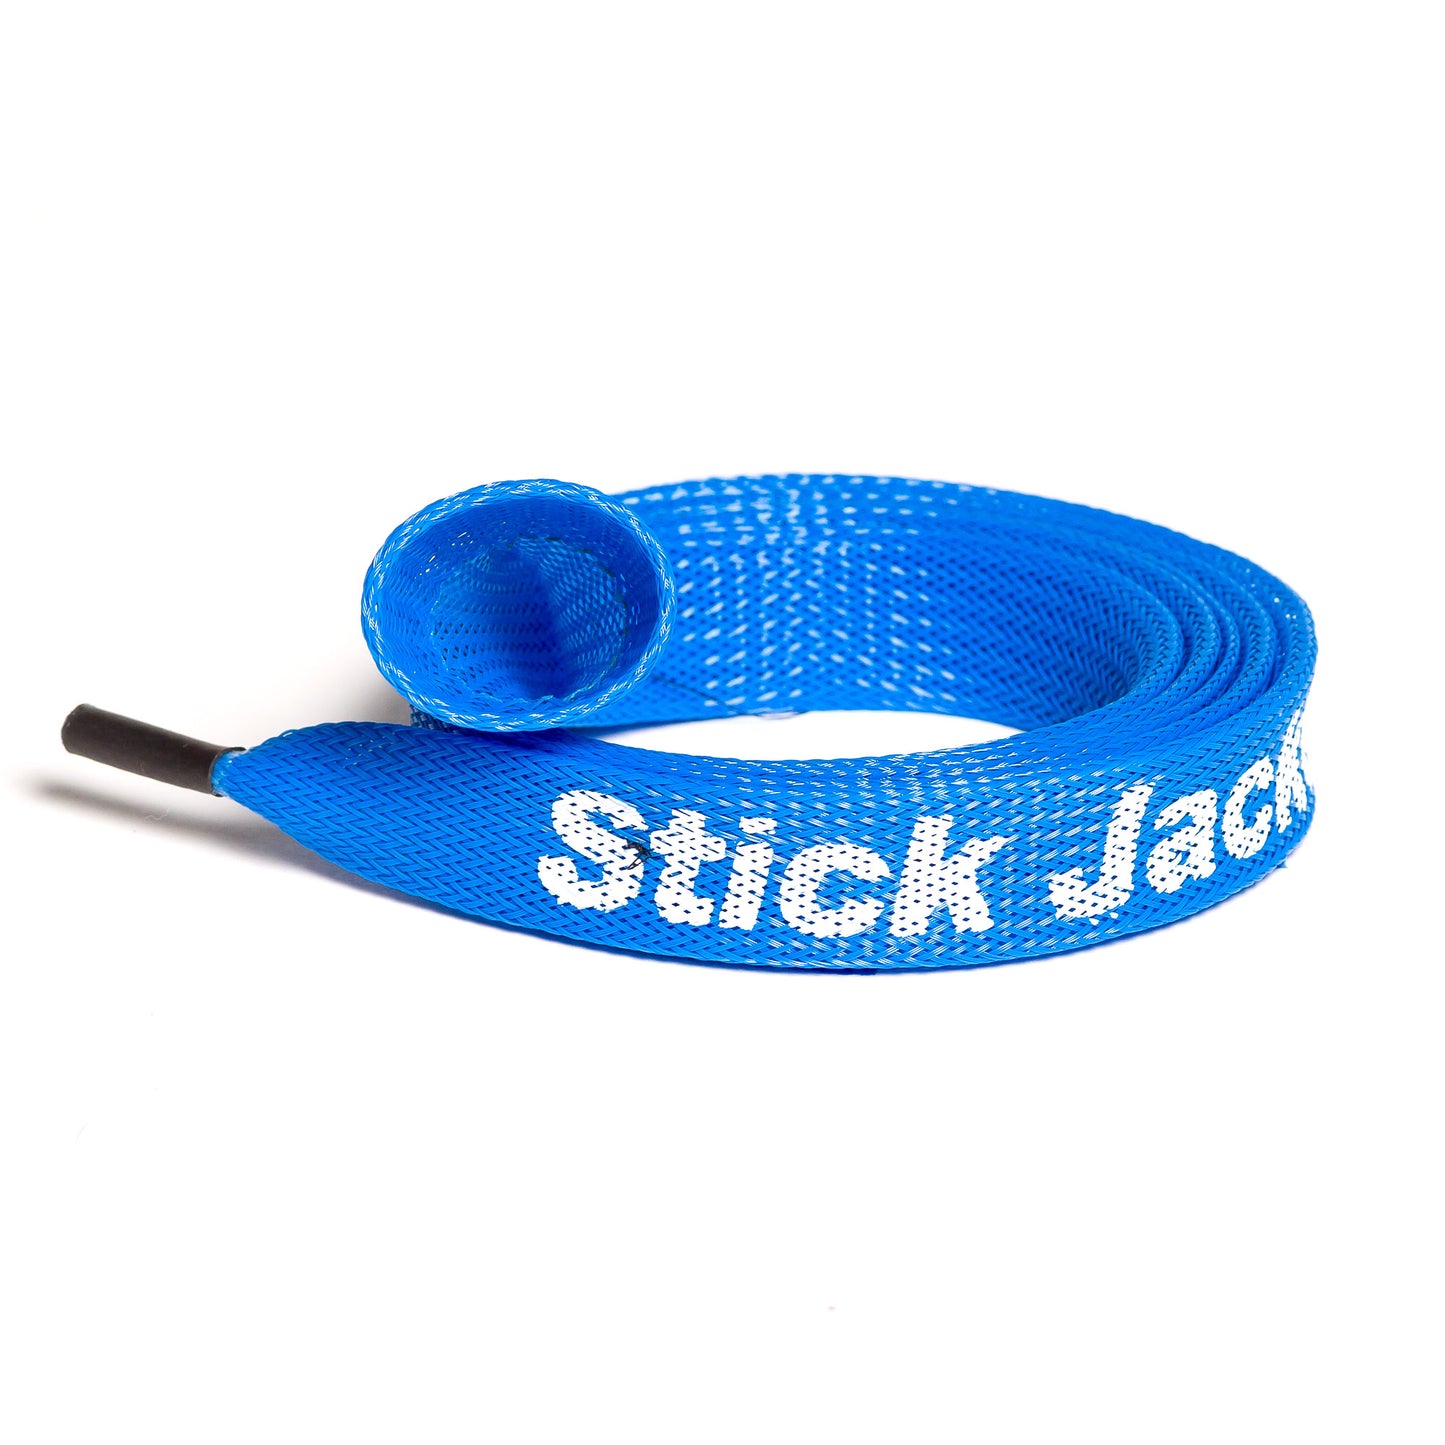 Stick Jacket Casting Rod Cover – Lures and Lead